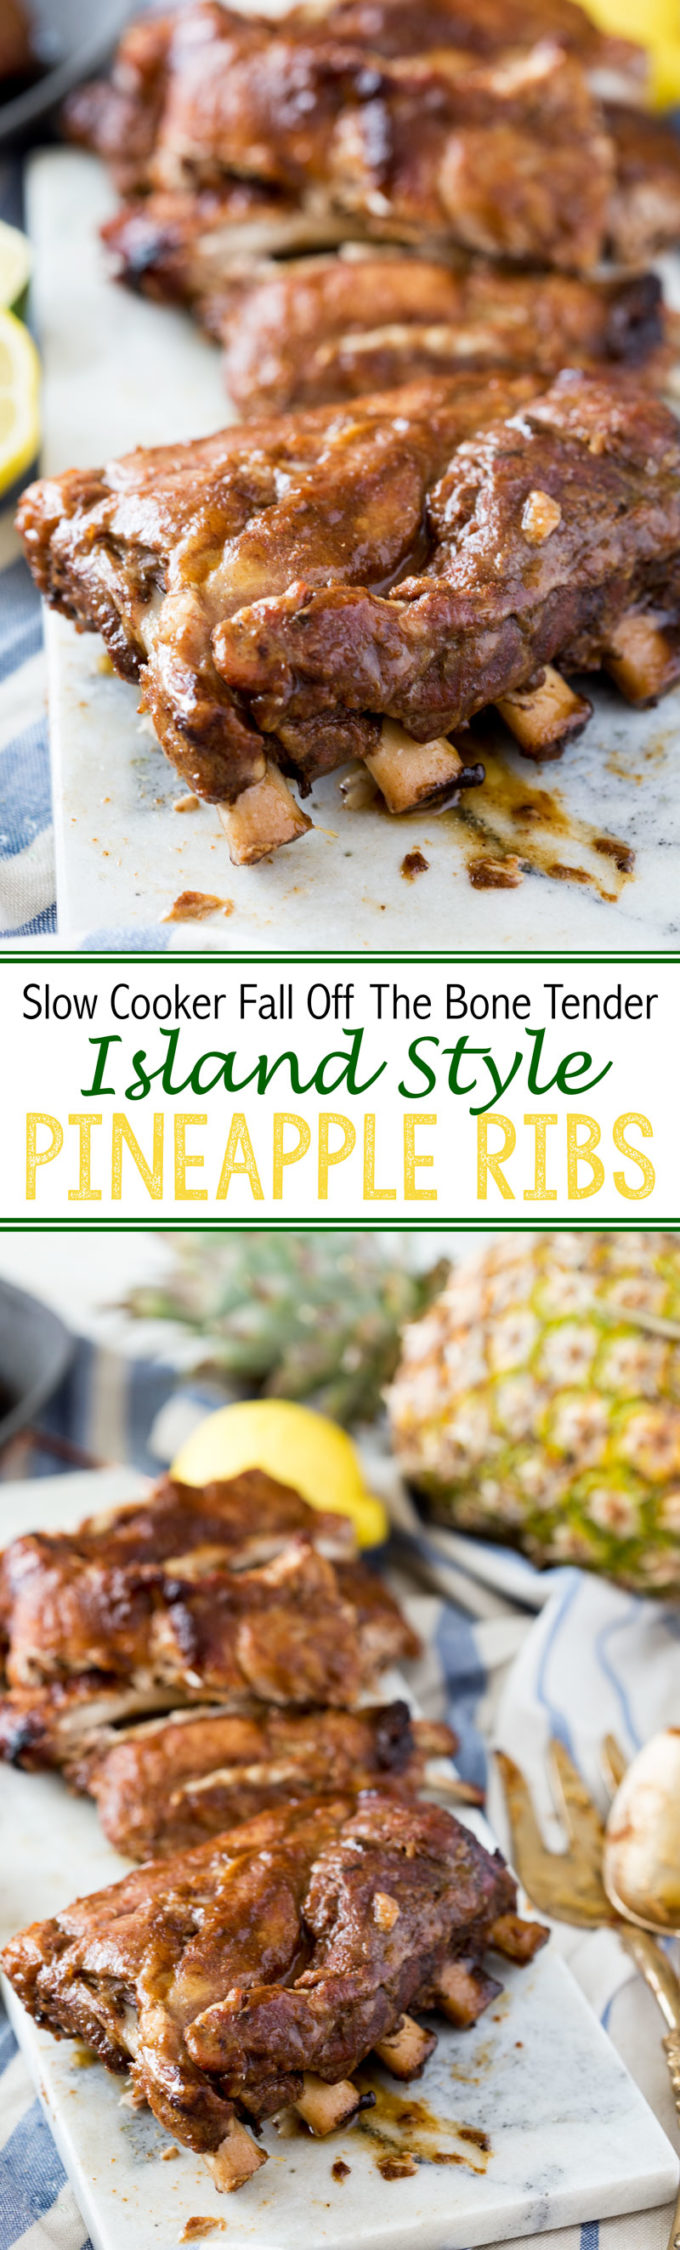 Fall off the bone tender island style pineapple BBQ pork ribs cooked in the slow cooker